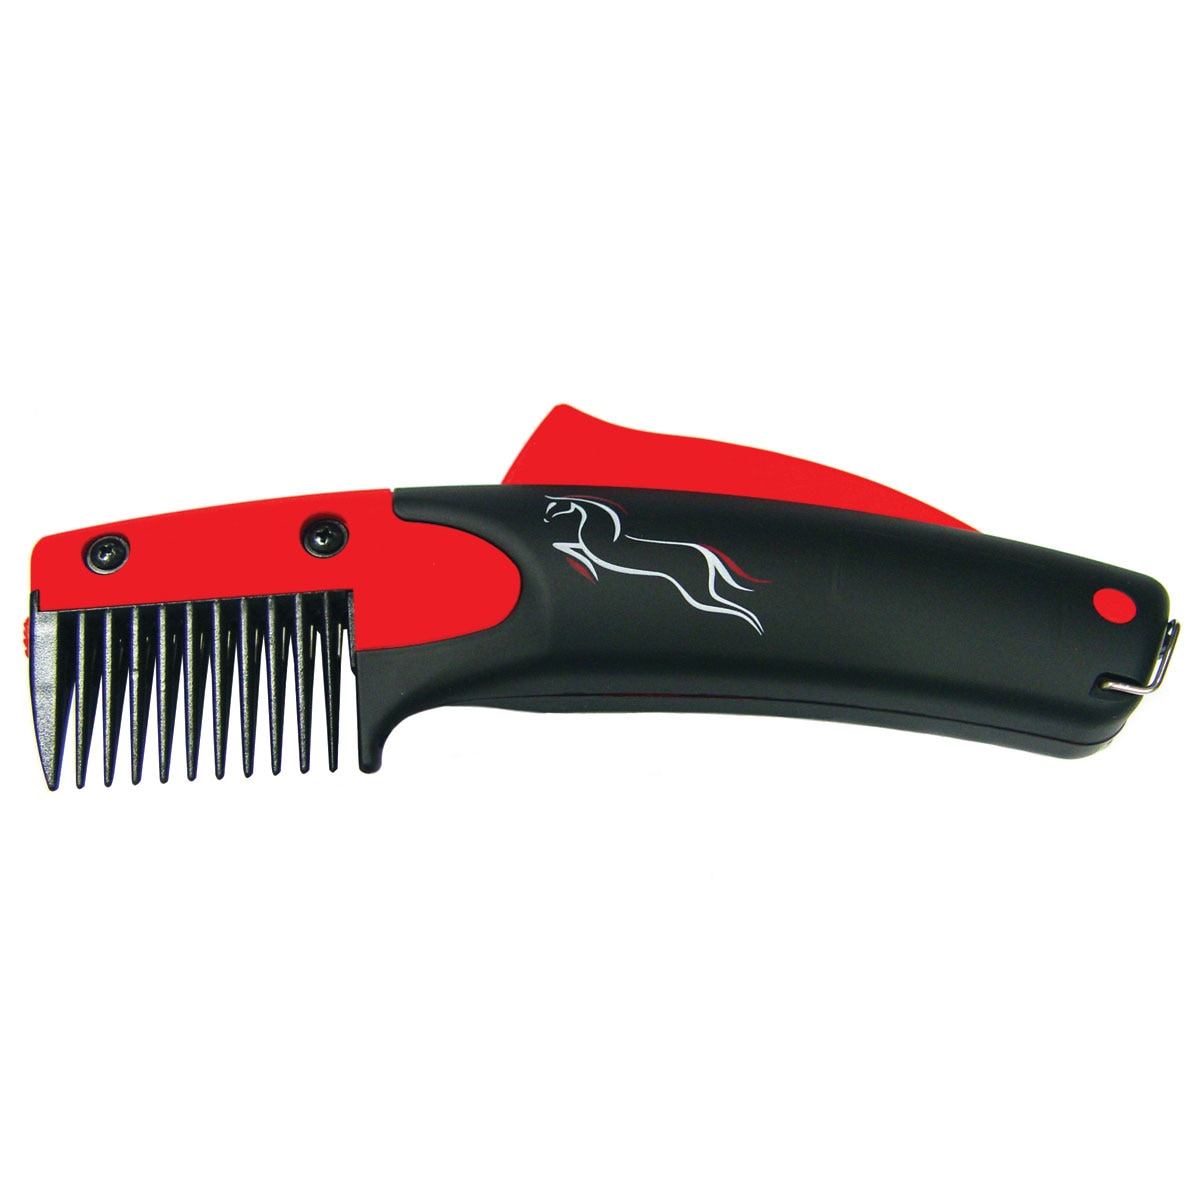 Painless Alternative with Easily Replaced Blades Solo Comb 